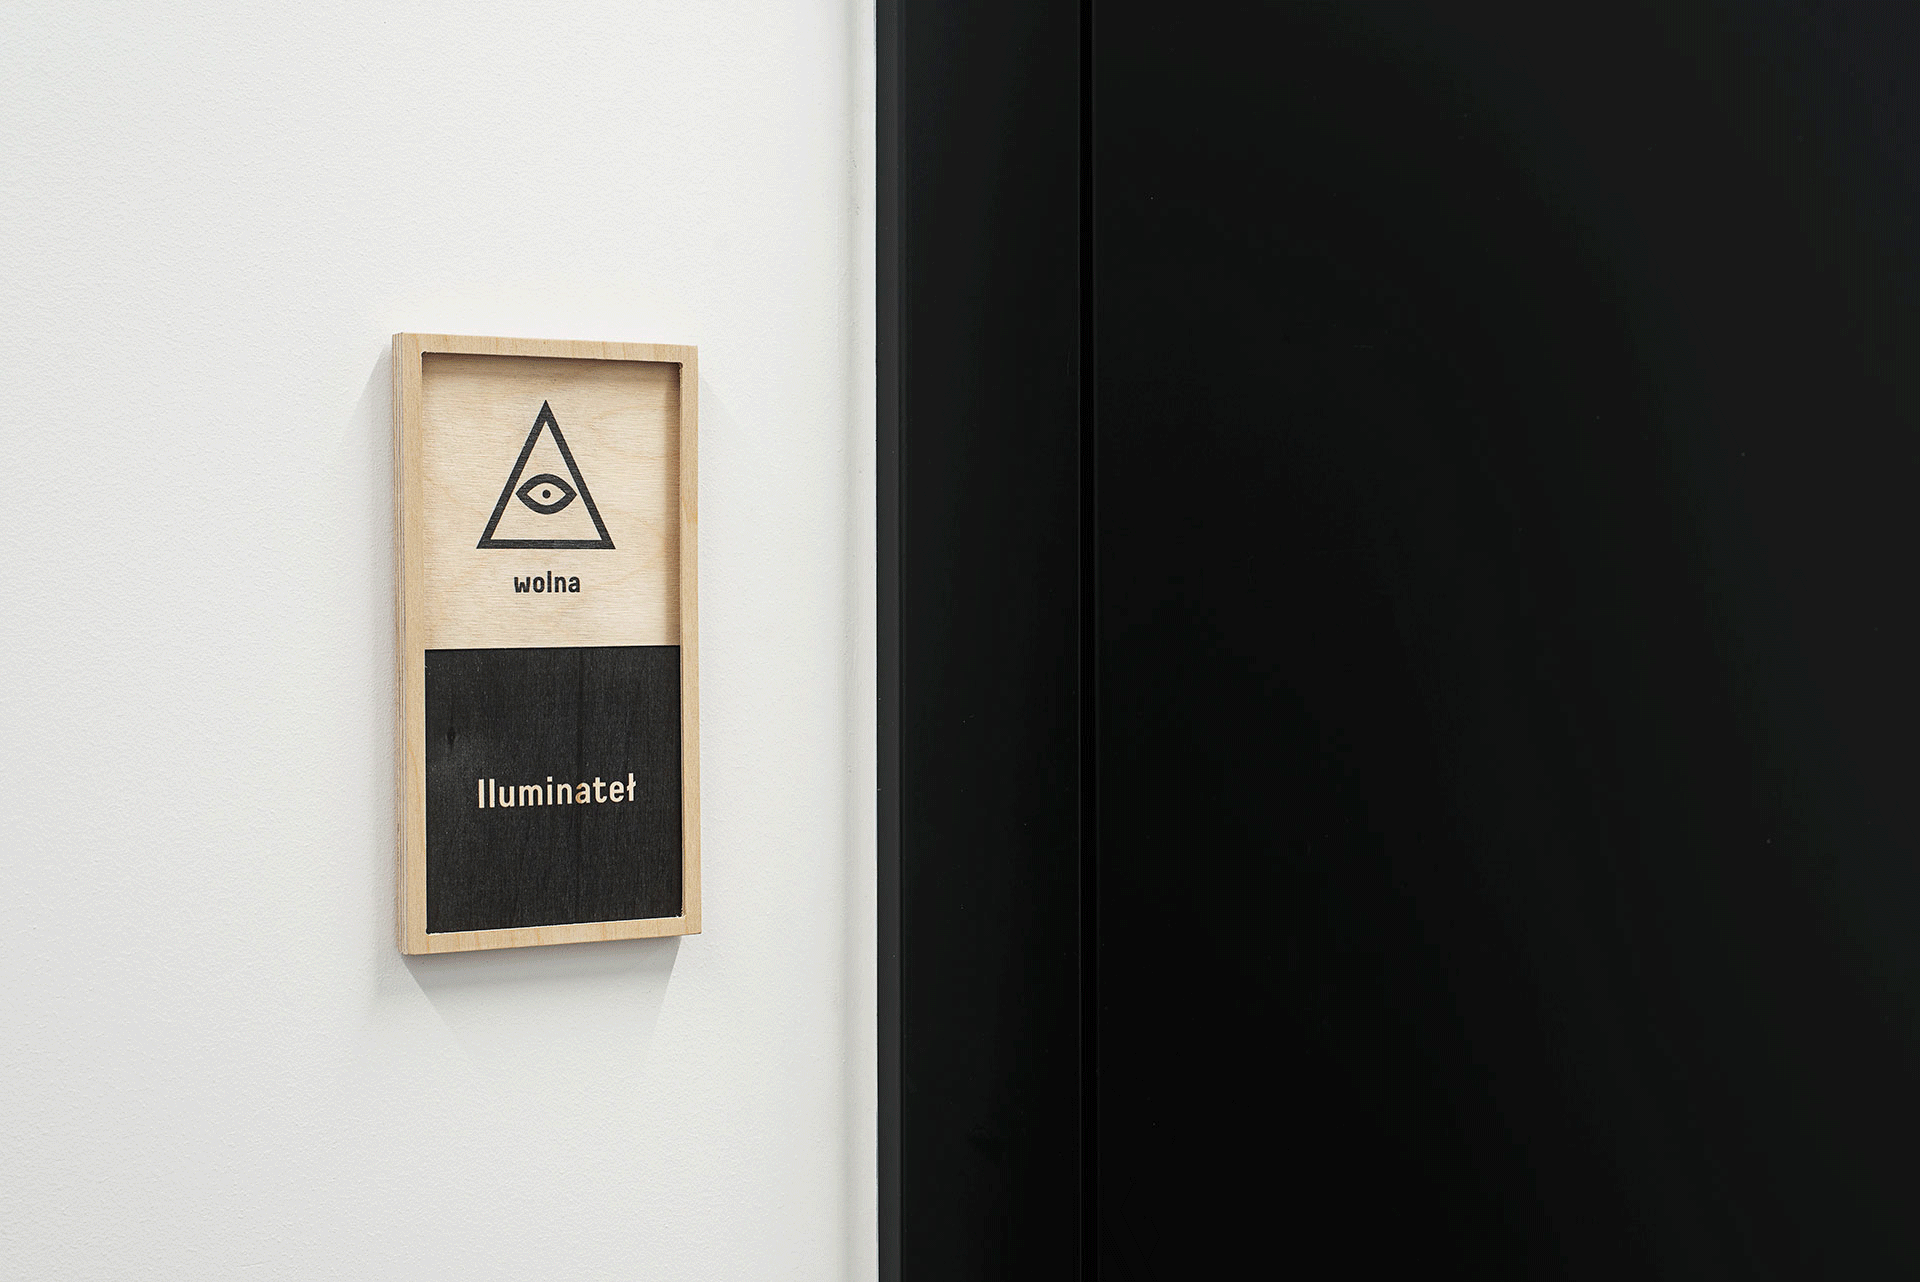 Wayfinding system with environmental graphics in The Software House headquarter in Gliwice